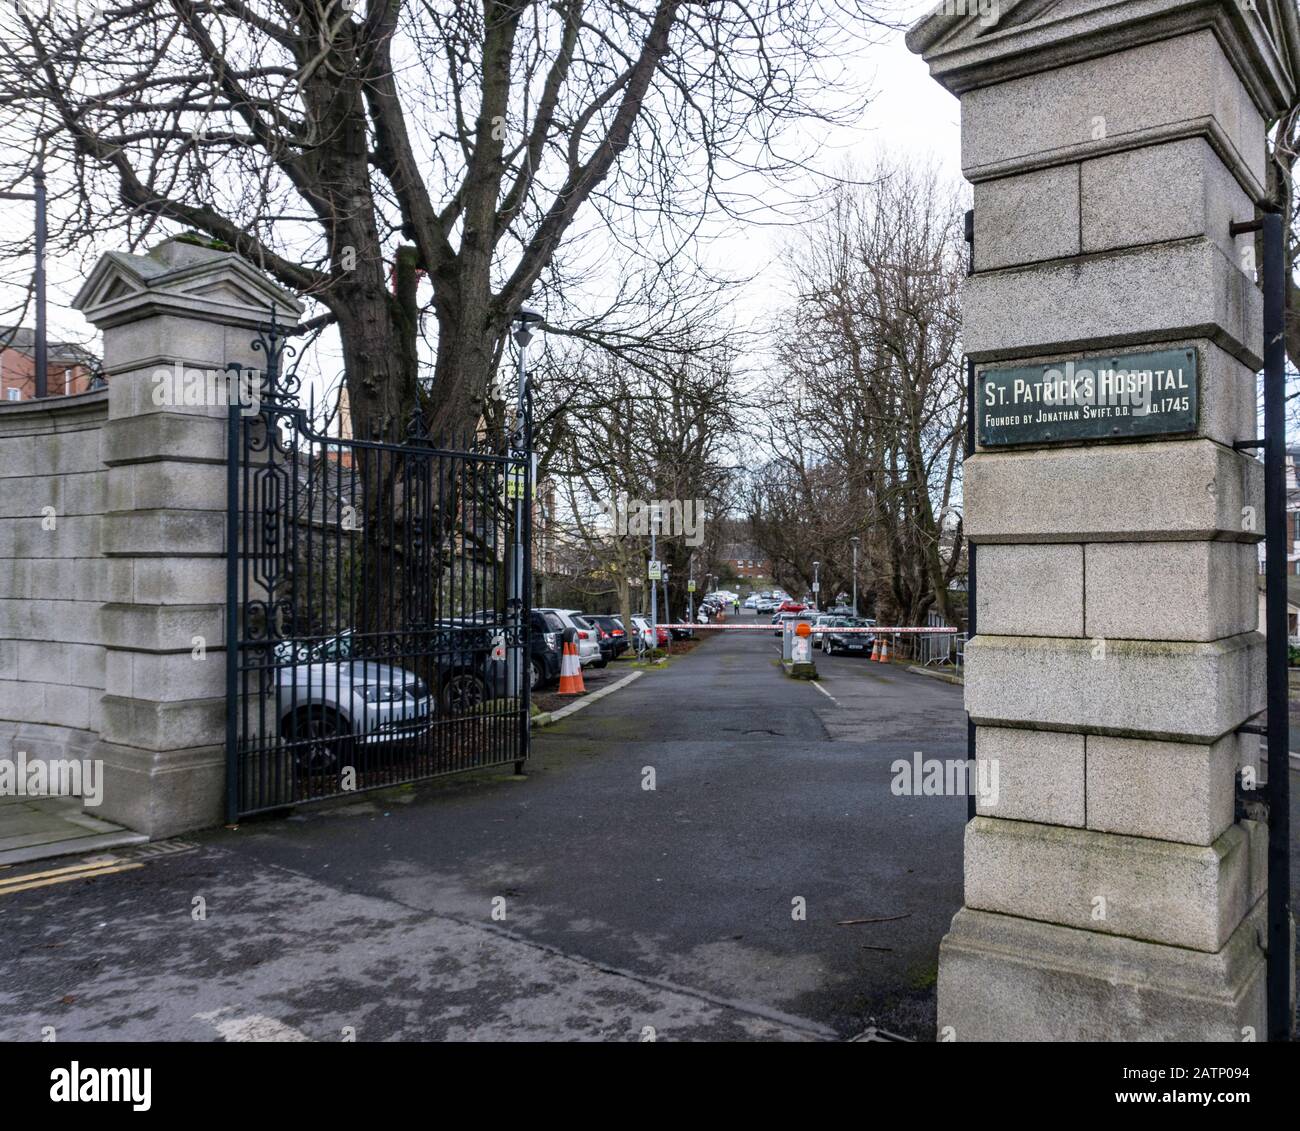 The entrance to St. Patricks Hospital in Kilmainham, Dublin, founded in 1745 by Jonathan Swift, author of Gulliver's Travels Stock Photo